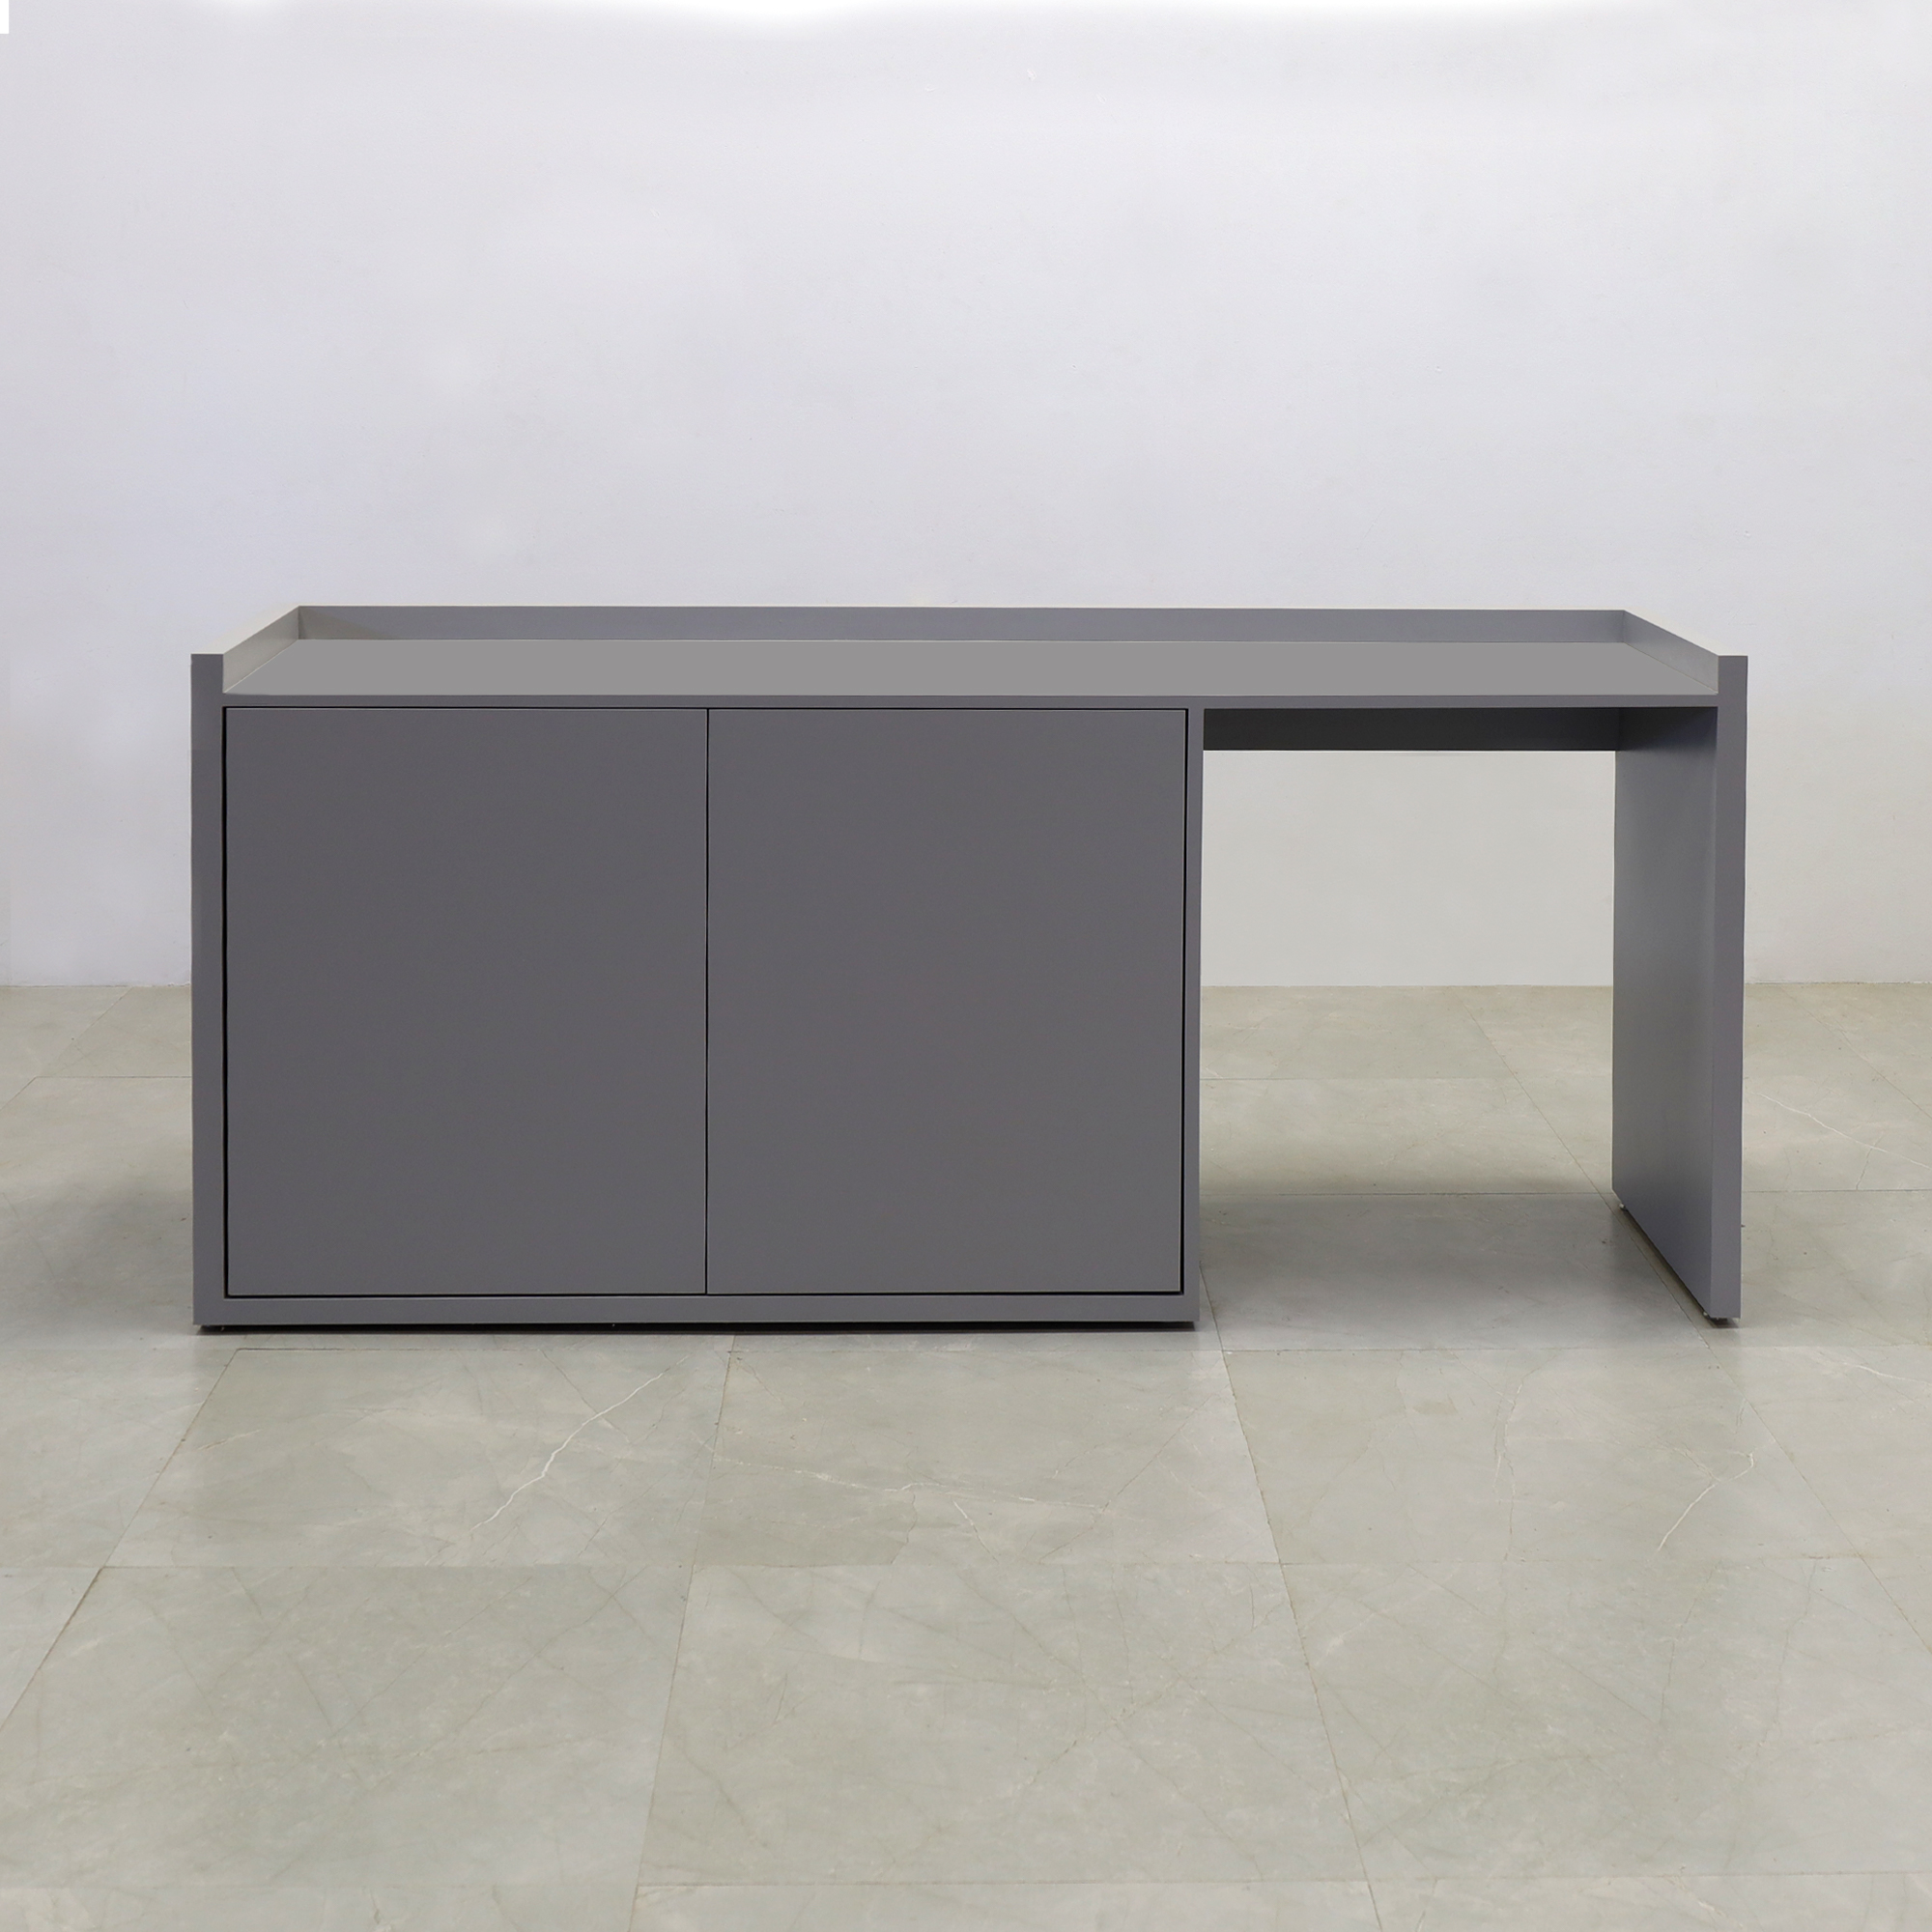 Avenue Beverage Server Station in storm gray matte laminate top, station and doors shown here.